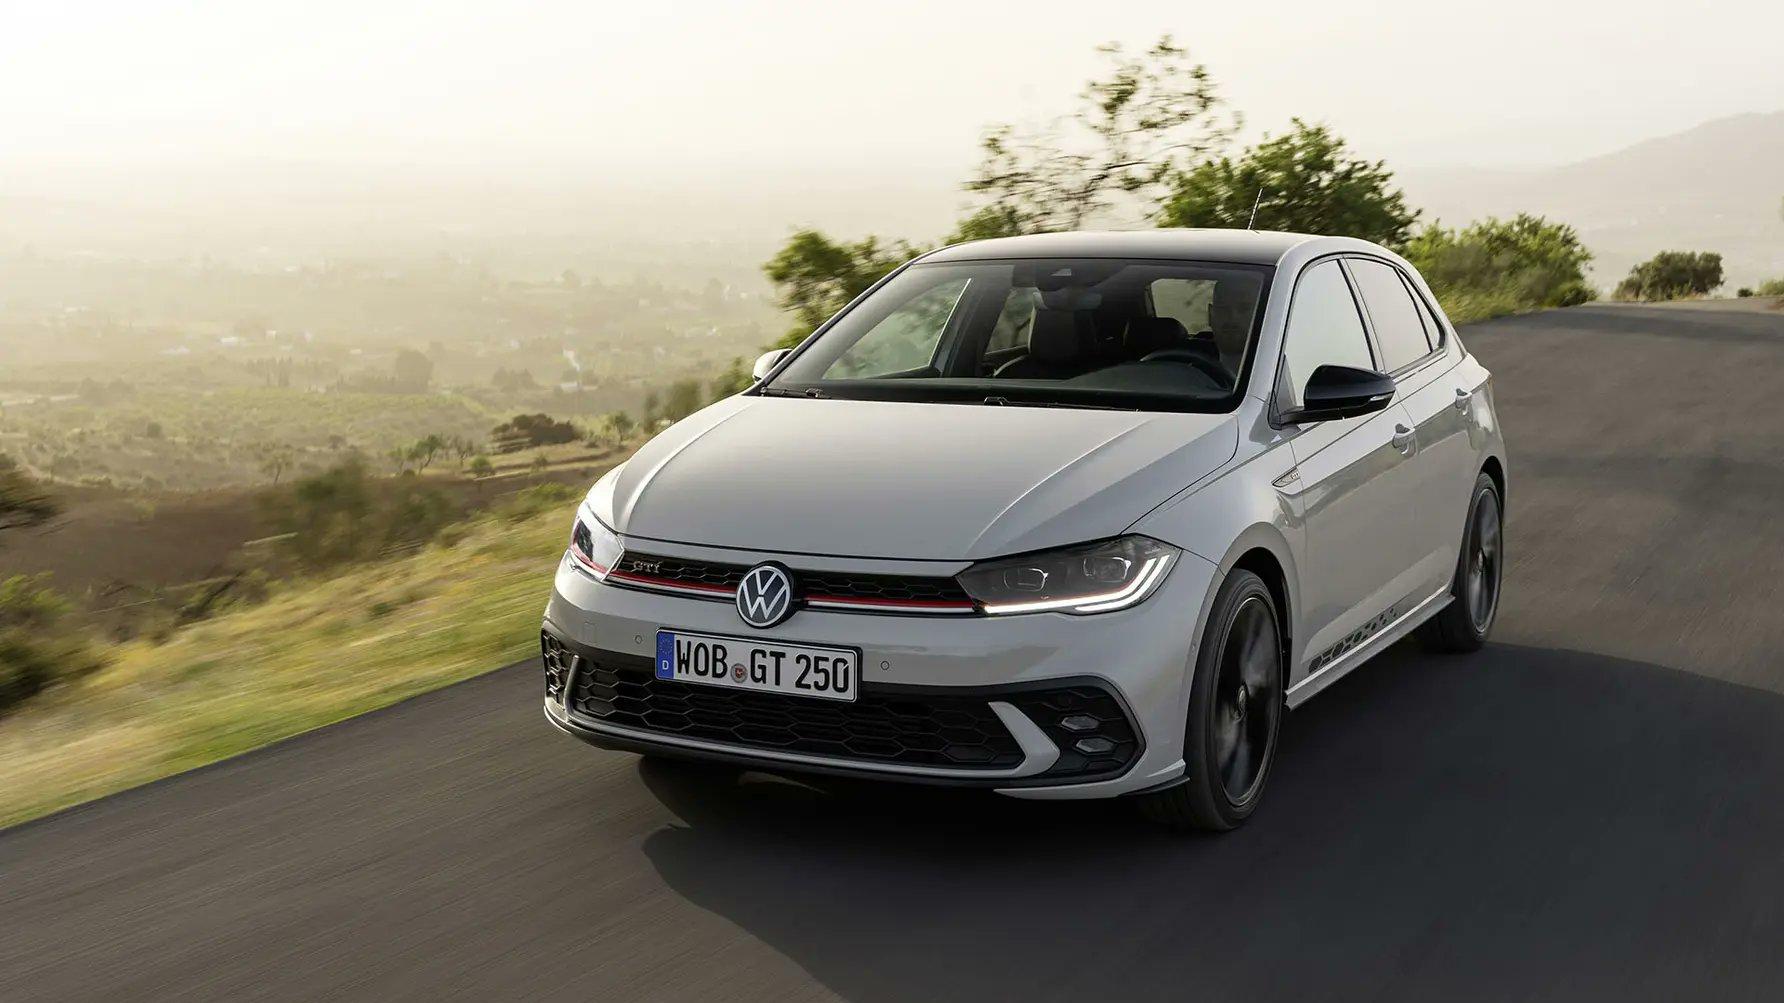 Top Gear On The Vw Polo Gti Edition Marks A Quarter